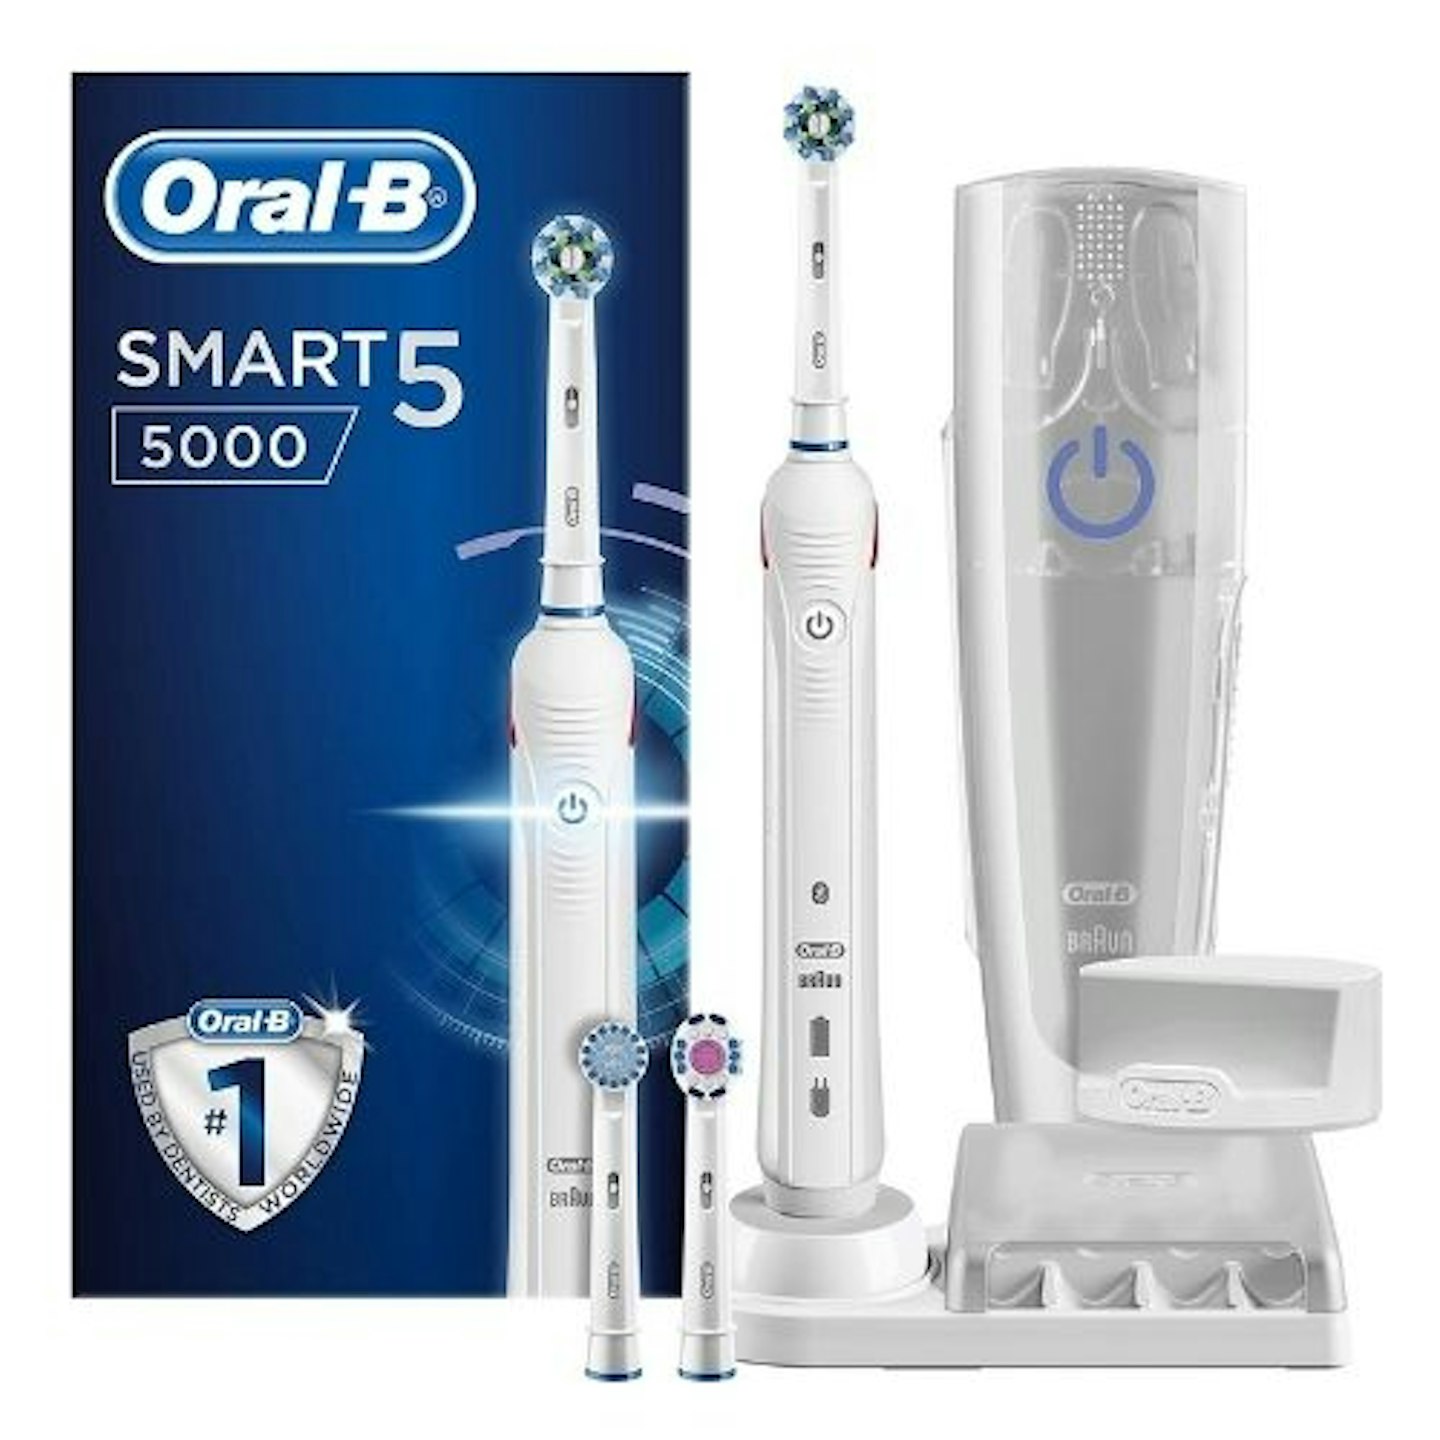 Oral-B Smart 5 Electric Toothbrush